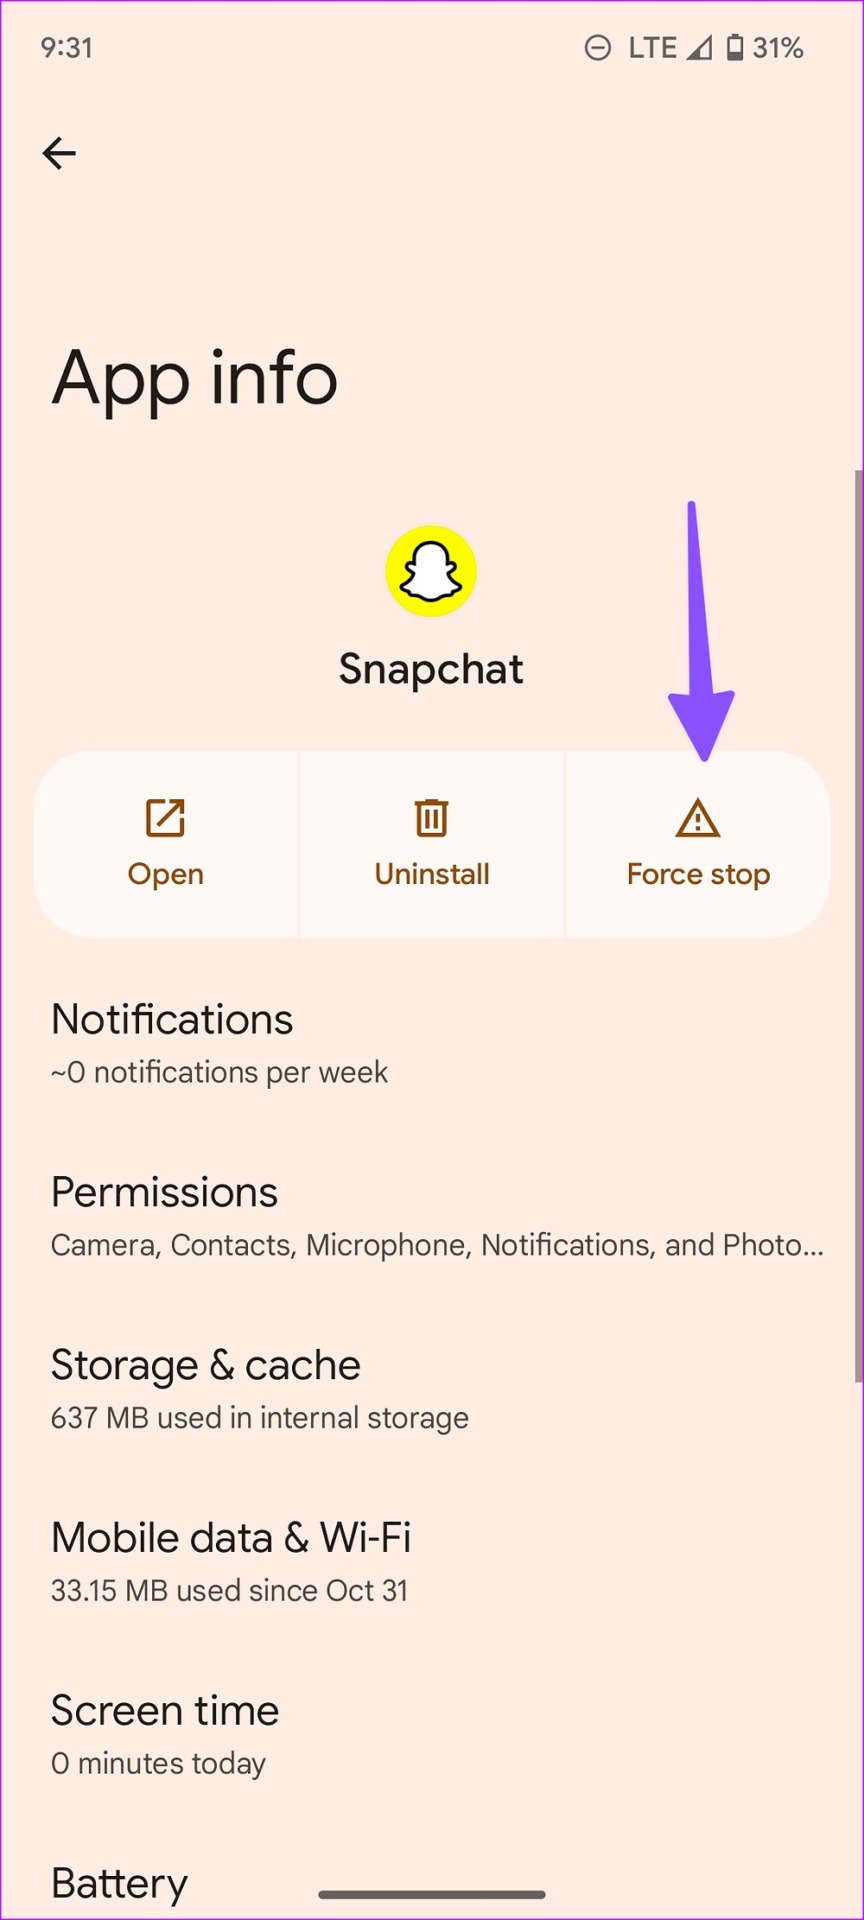 why won't snapchat work on wifi?